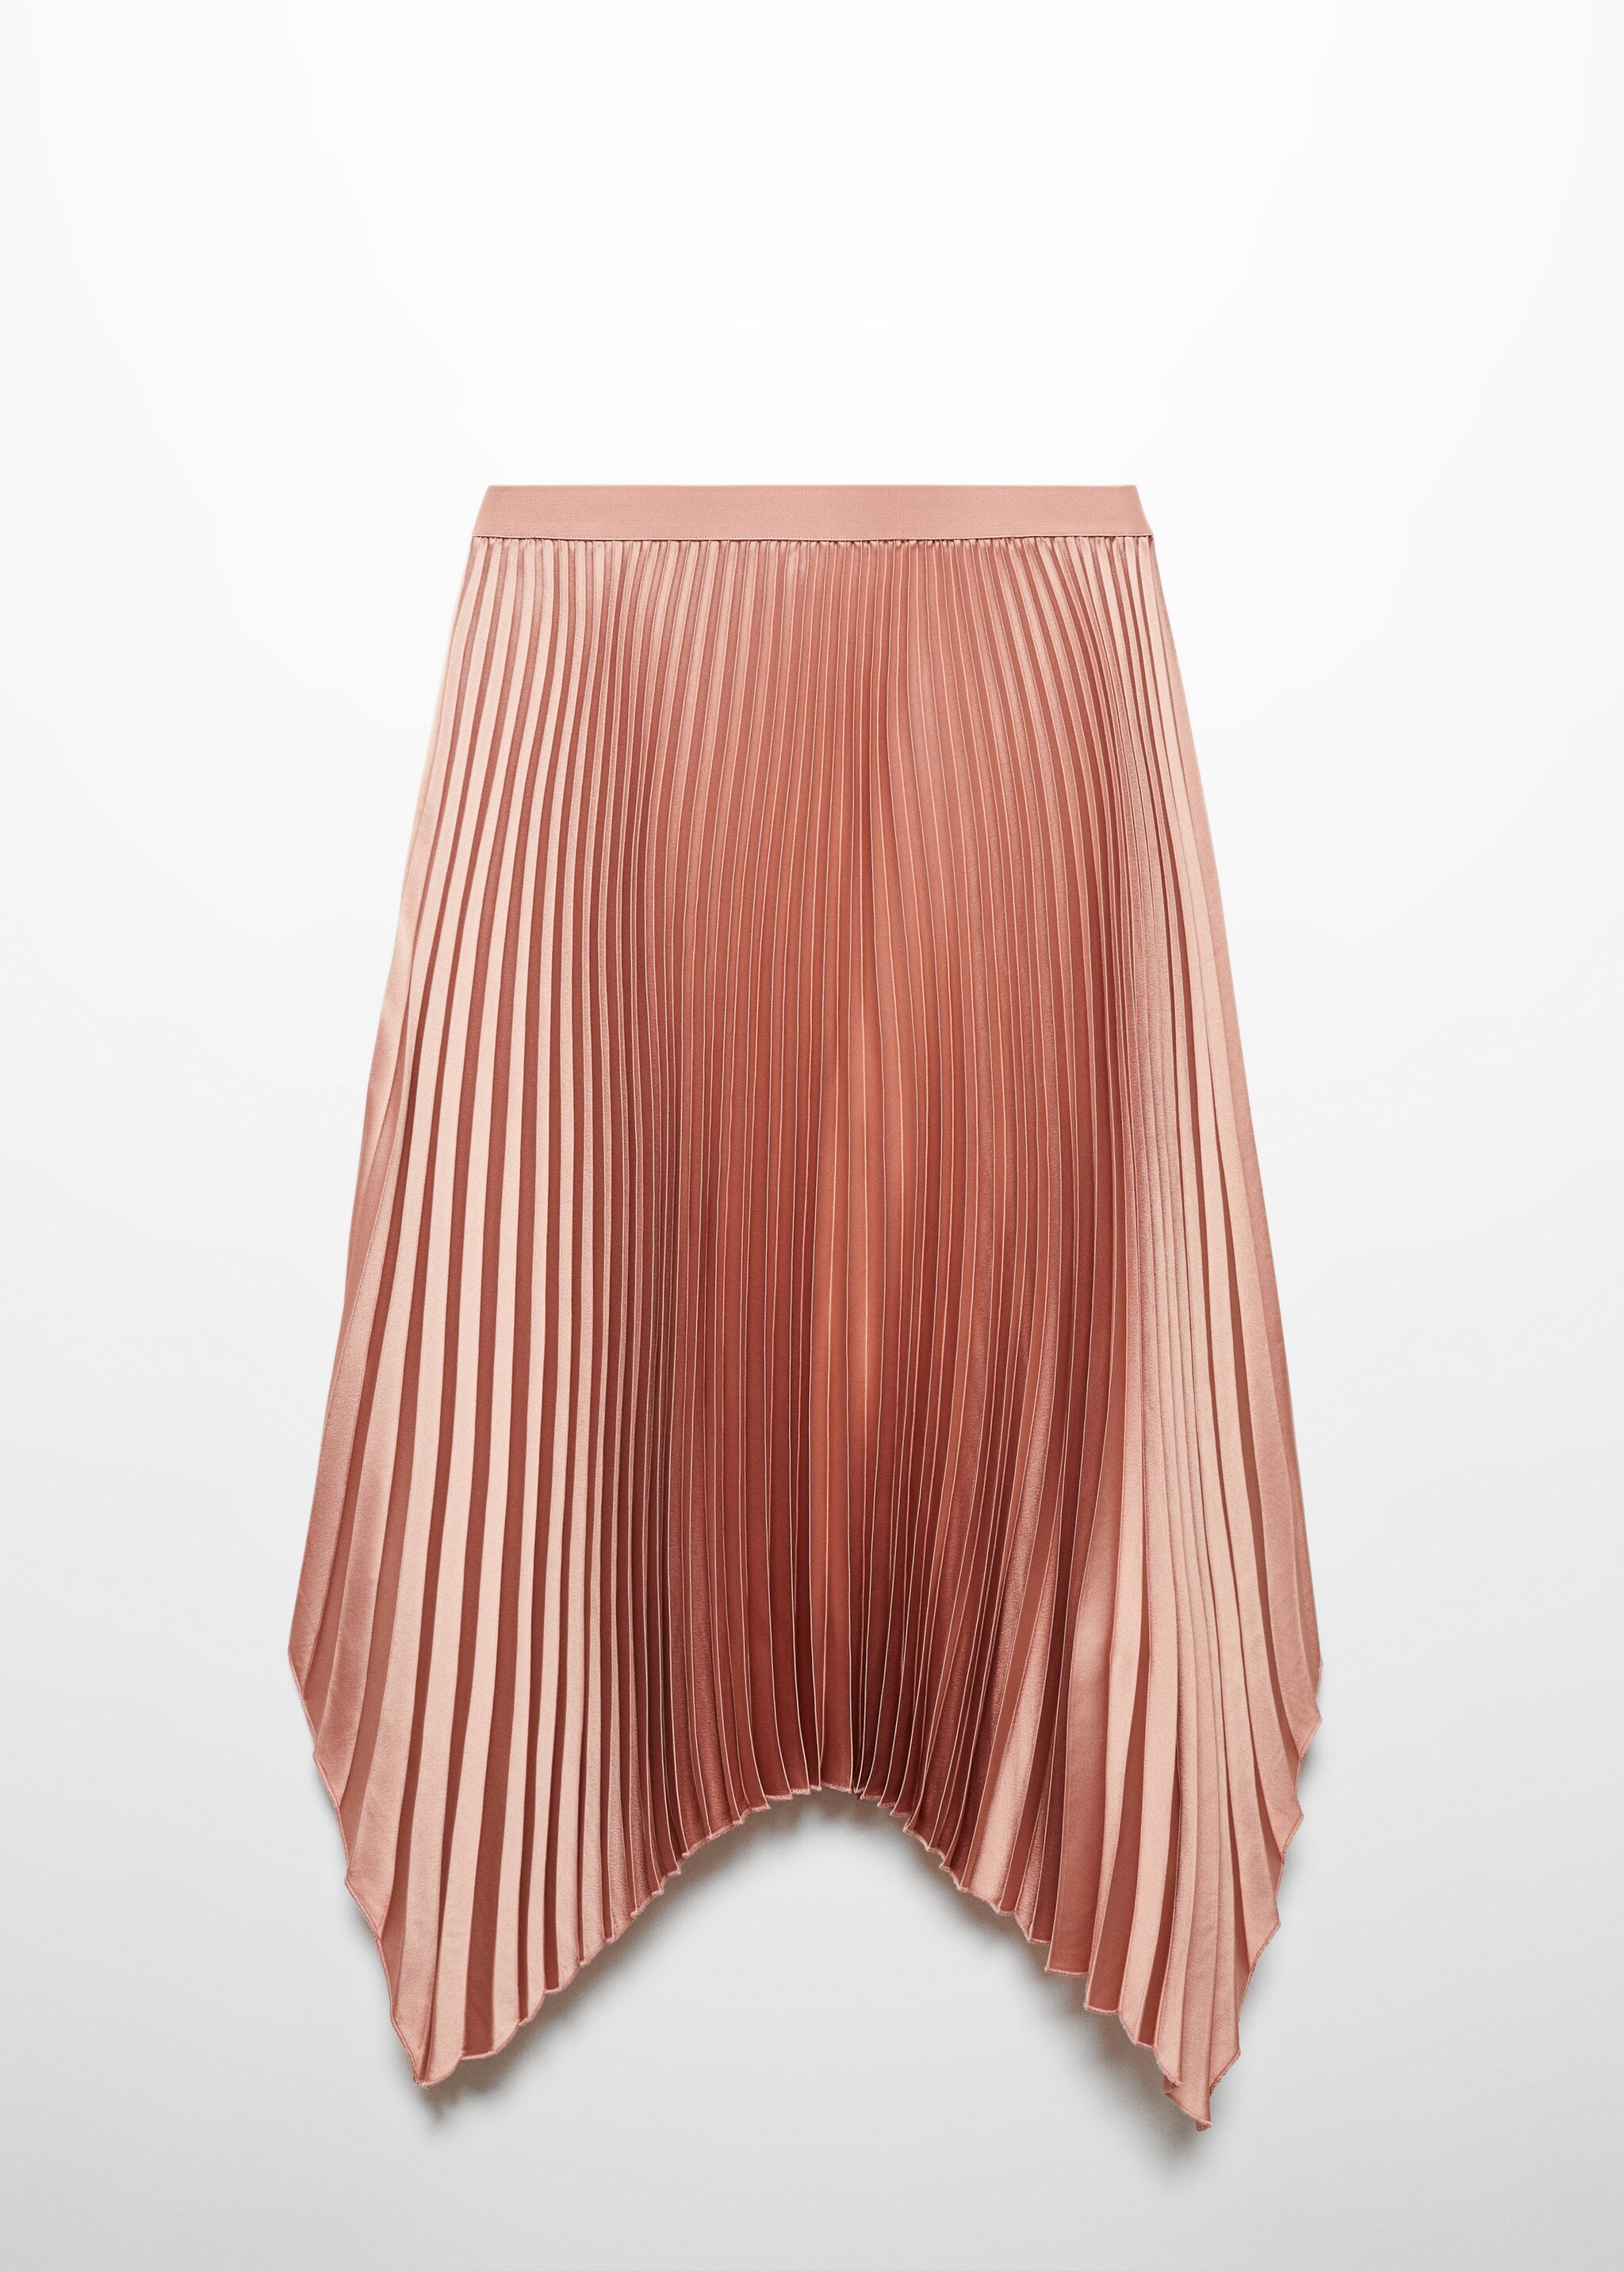 Irregular pleated skirt - Article without model